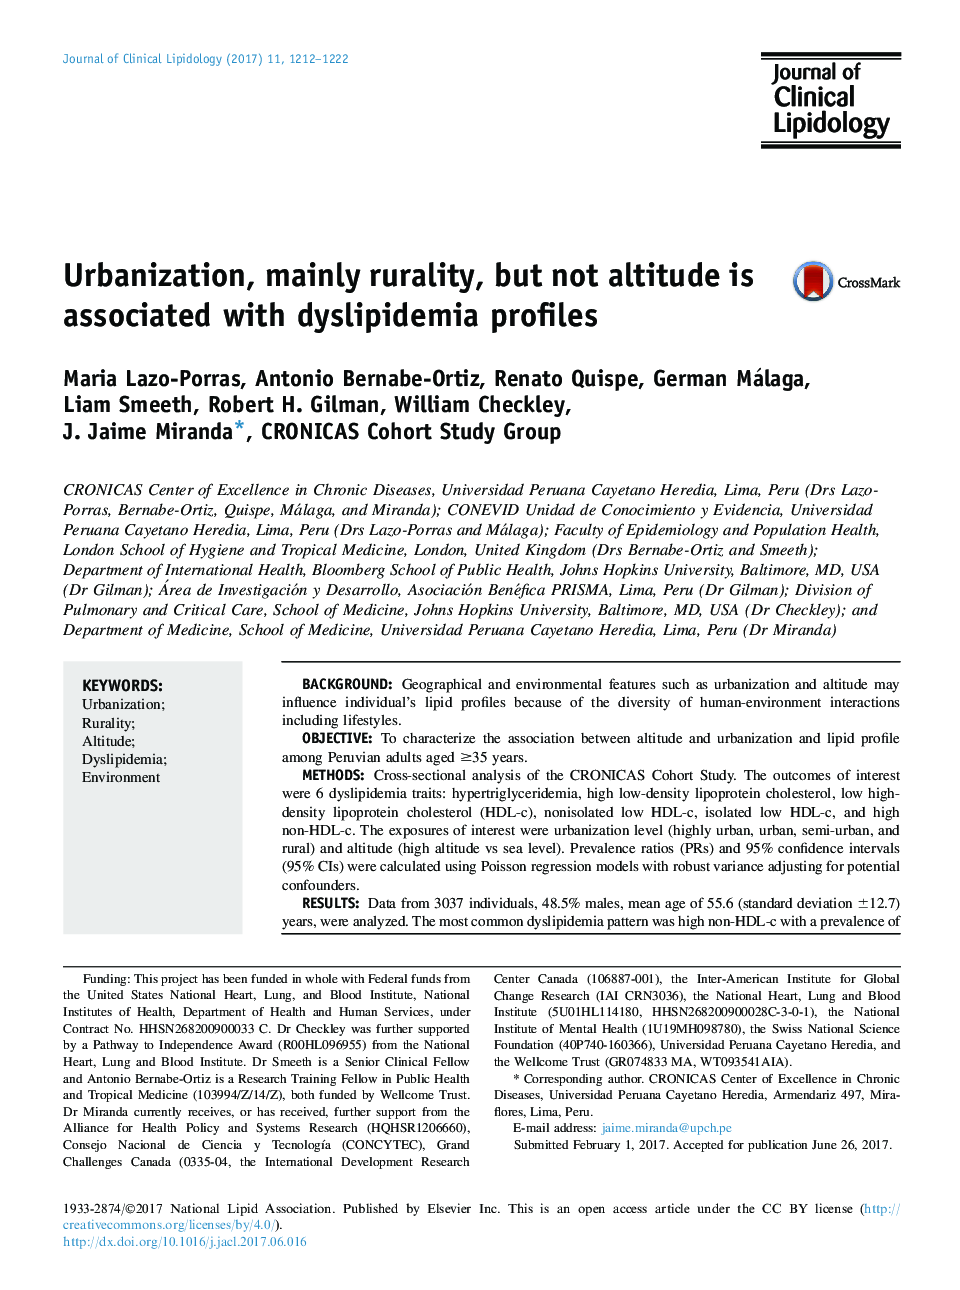 Urbanization, mainly rurality, but not altitude is associated with dyslipidemia profiles